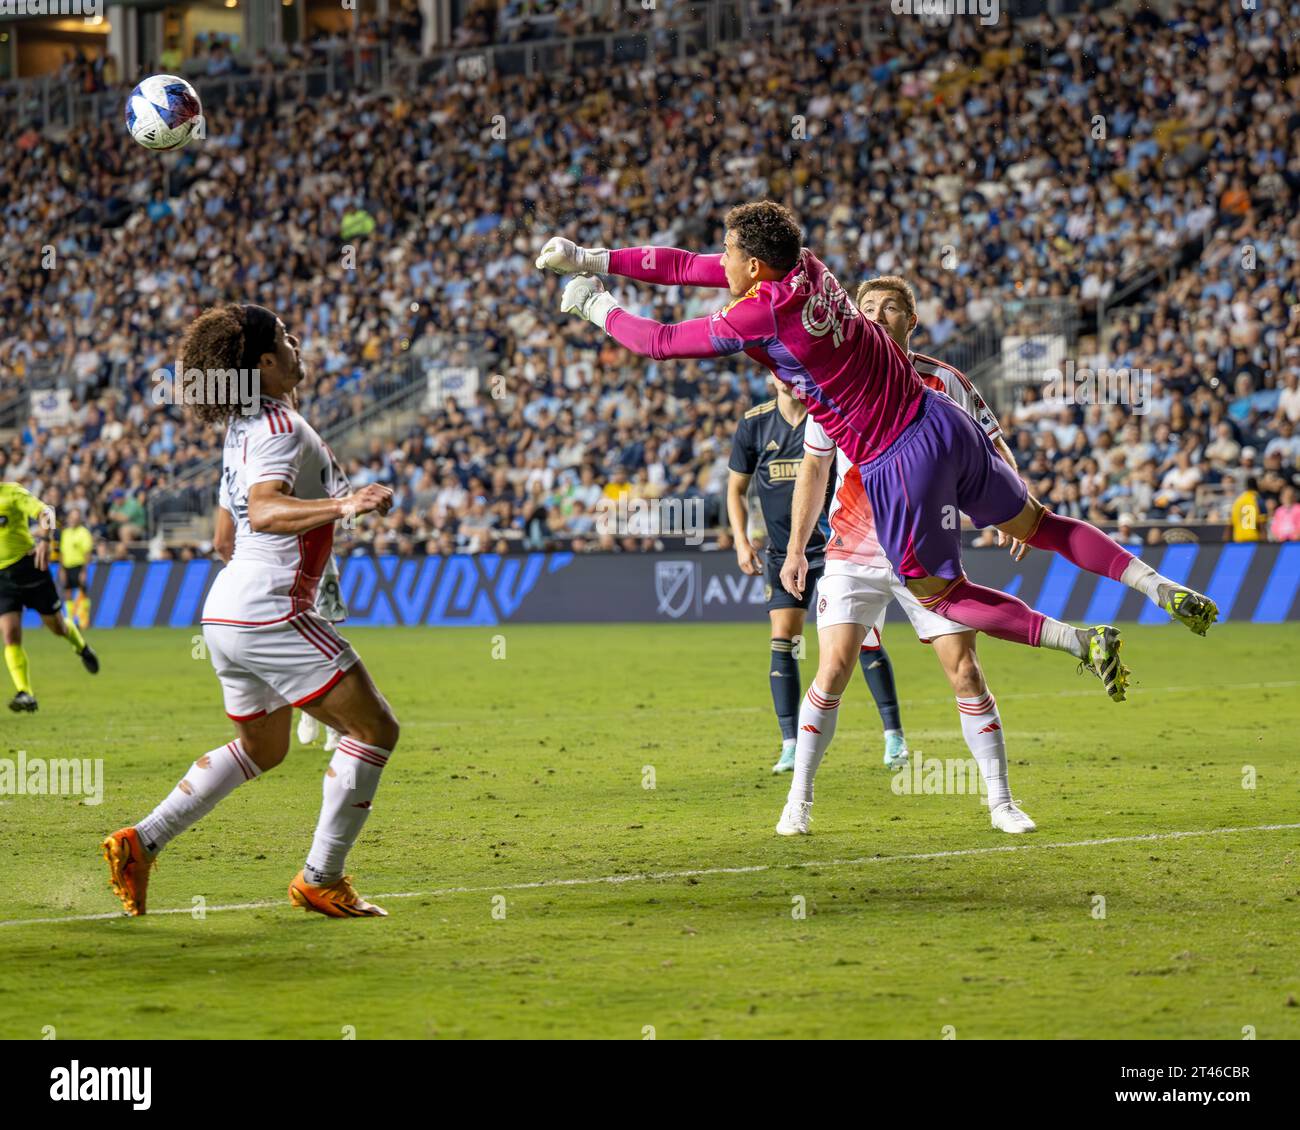 Jacob Jackson New England Revolution goalkeeper punches the ball away during an MLS match against the Philadelphia Union - Major League Soccer footballers playing on the pitch in the USA / United States Credit: Don Mennig / Alamy News Stock Photo